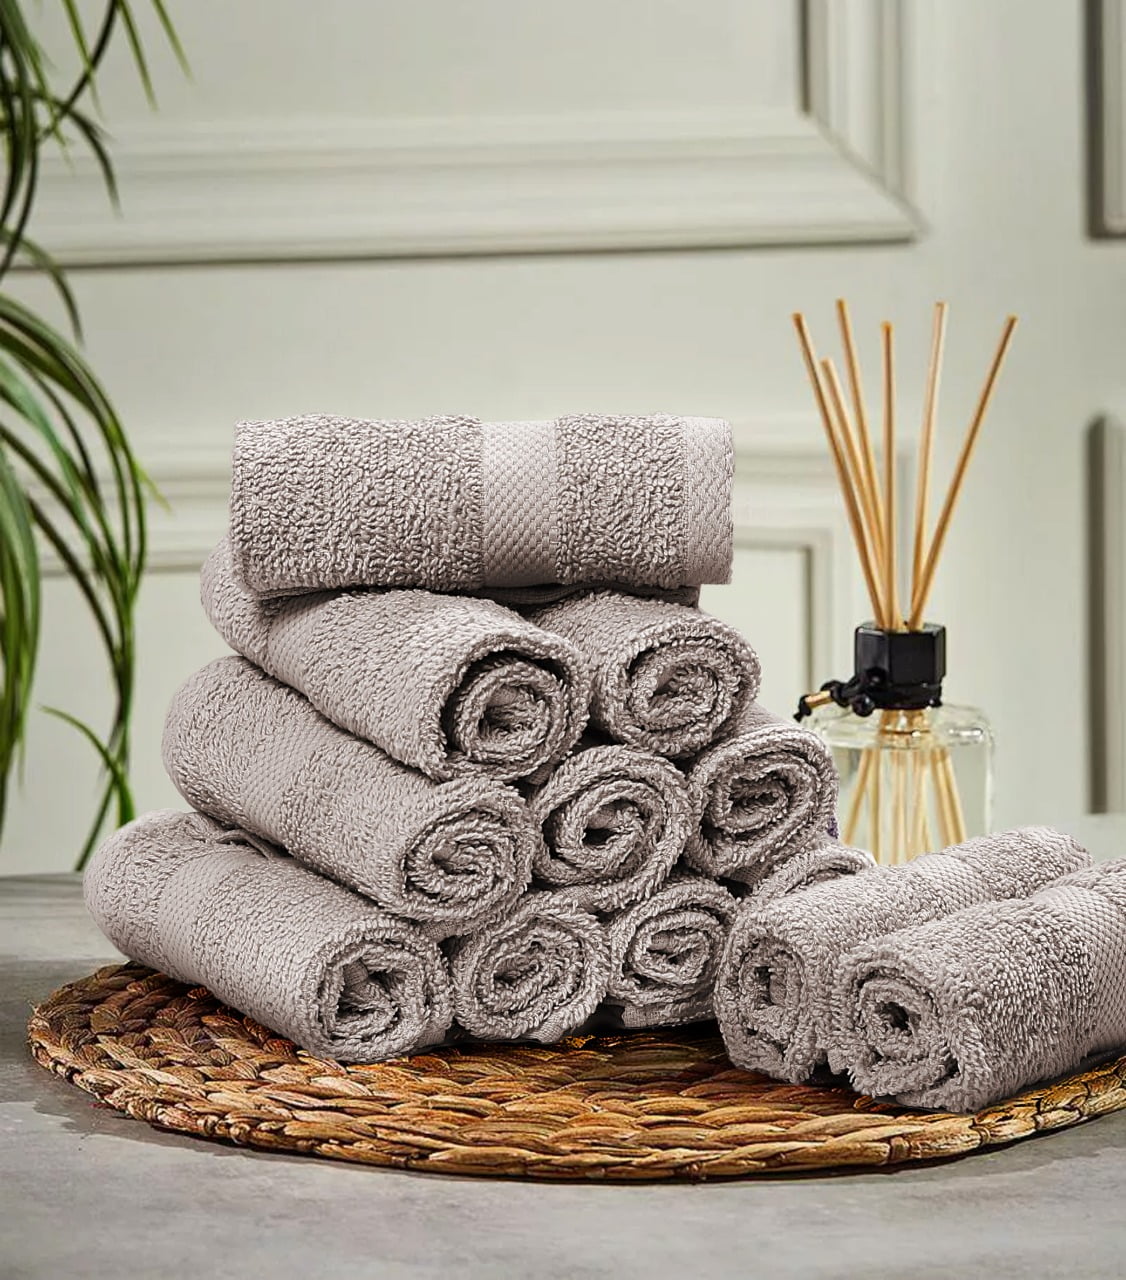 2-Piece Bath Towels Bale Gift Set – Double Looped Cotton Soft & Absorbent -  Todd Linens